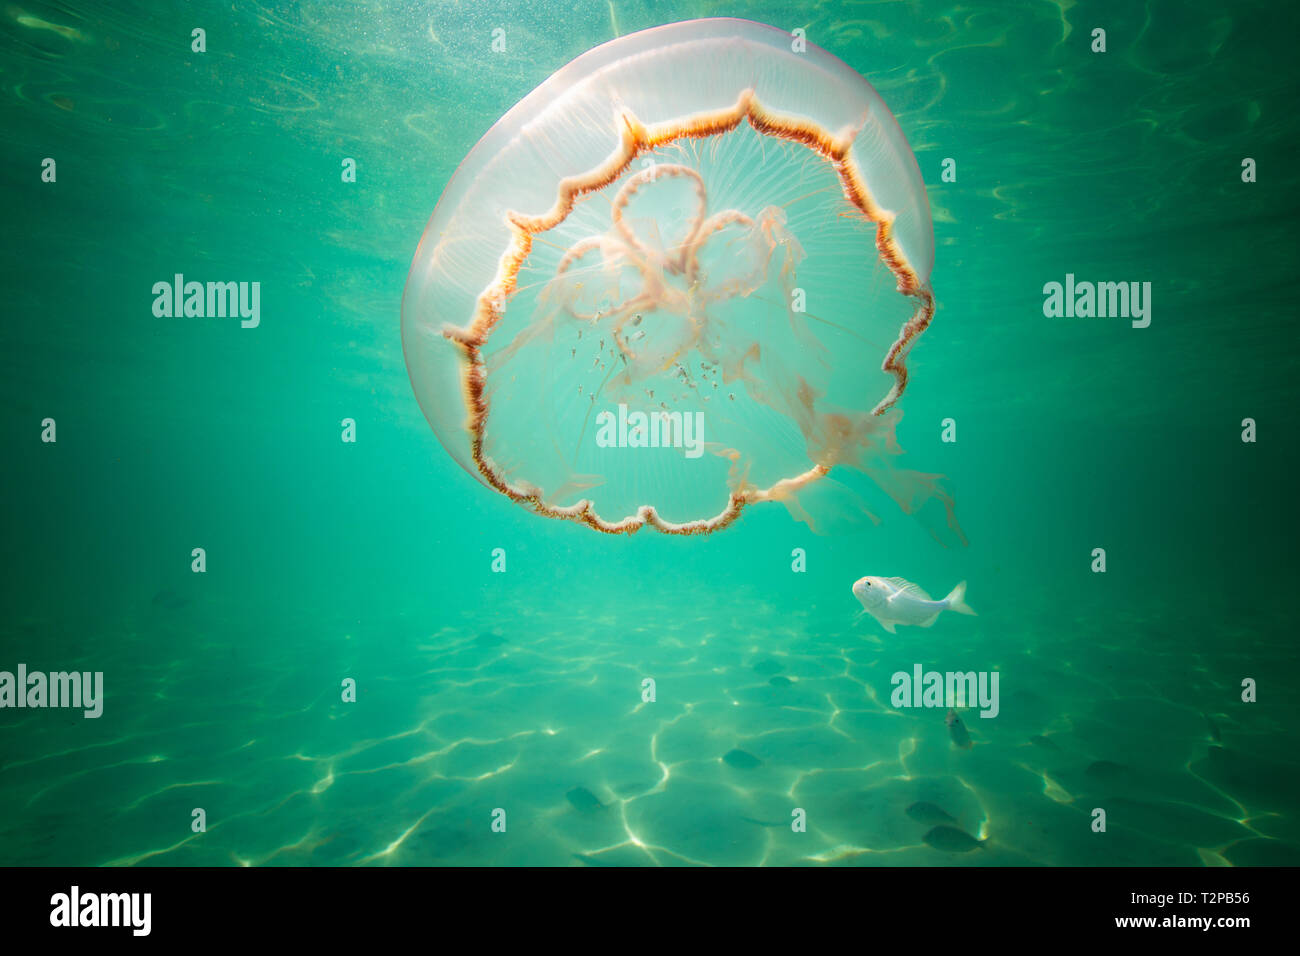 Moon jellyfish harbouring baby fish for protection against predators Stock Photo